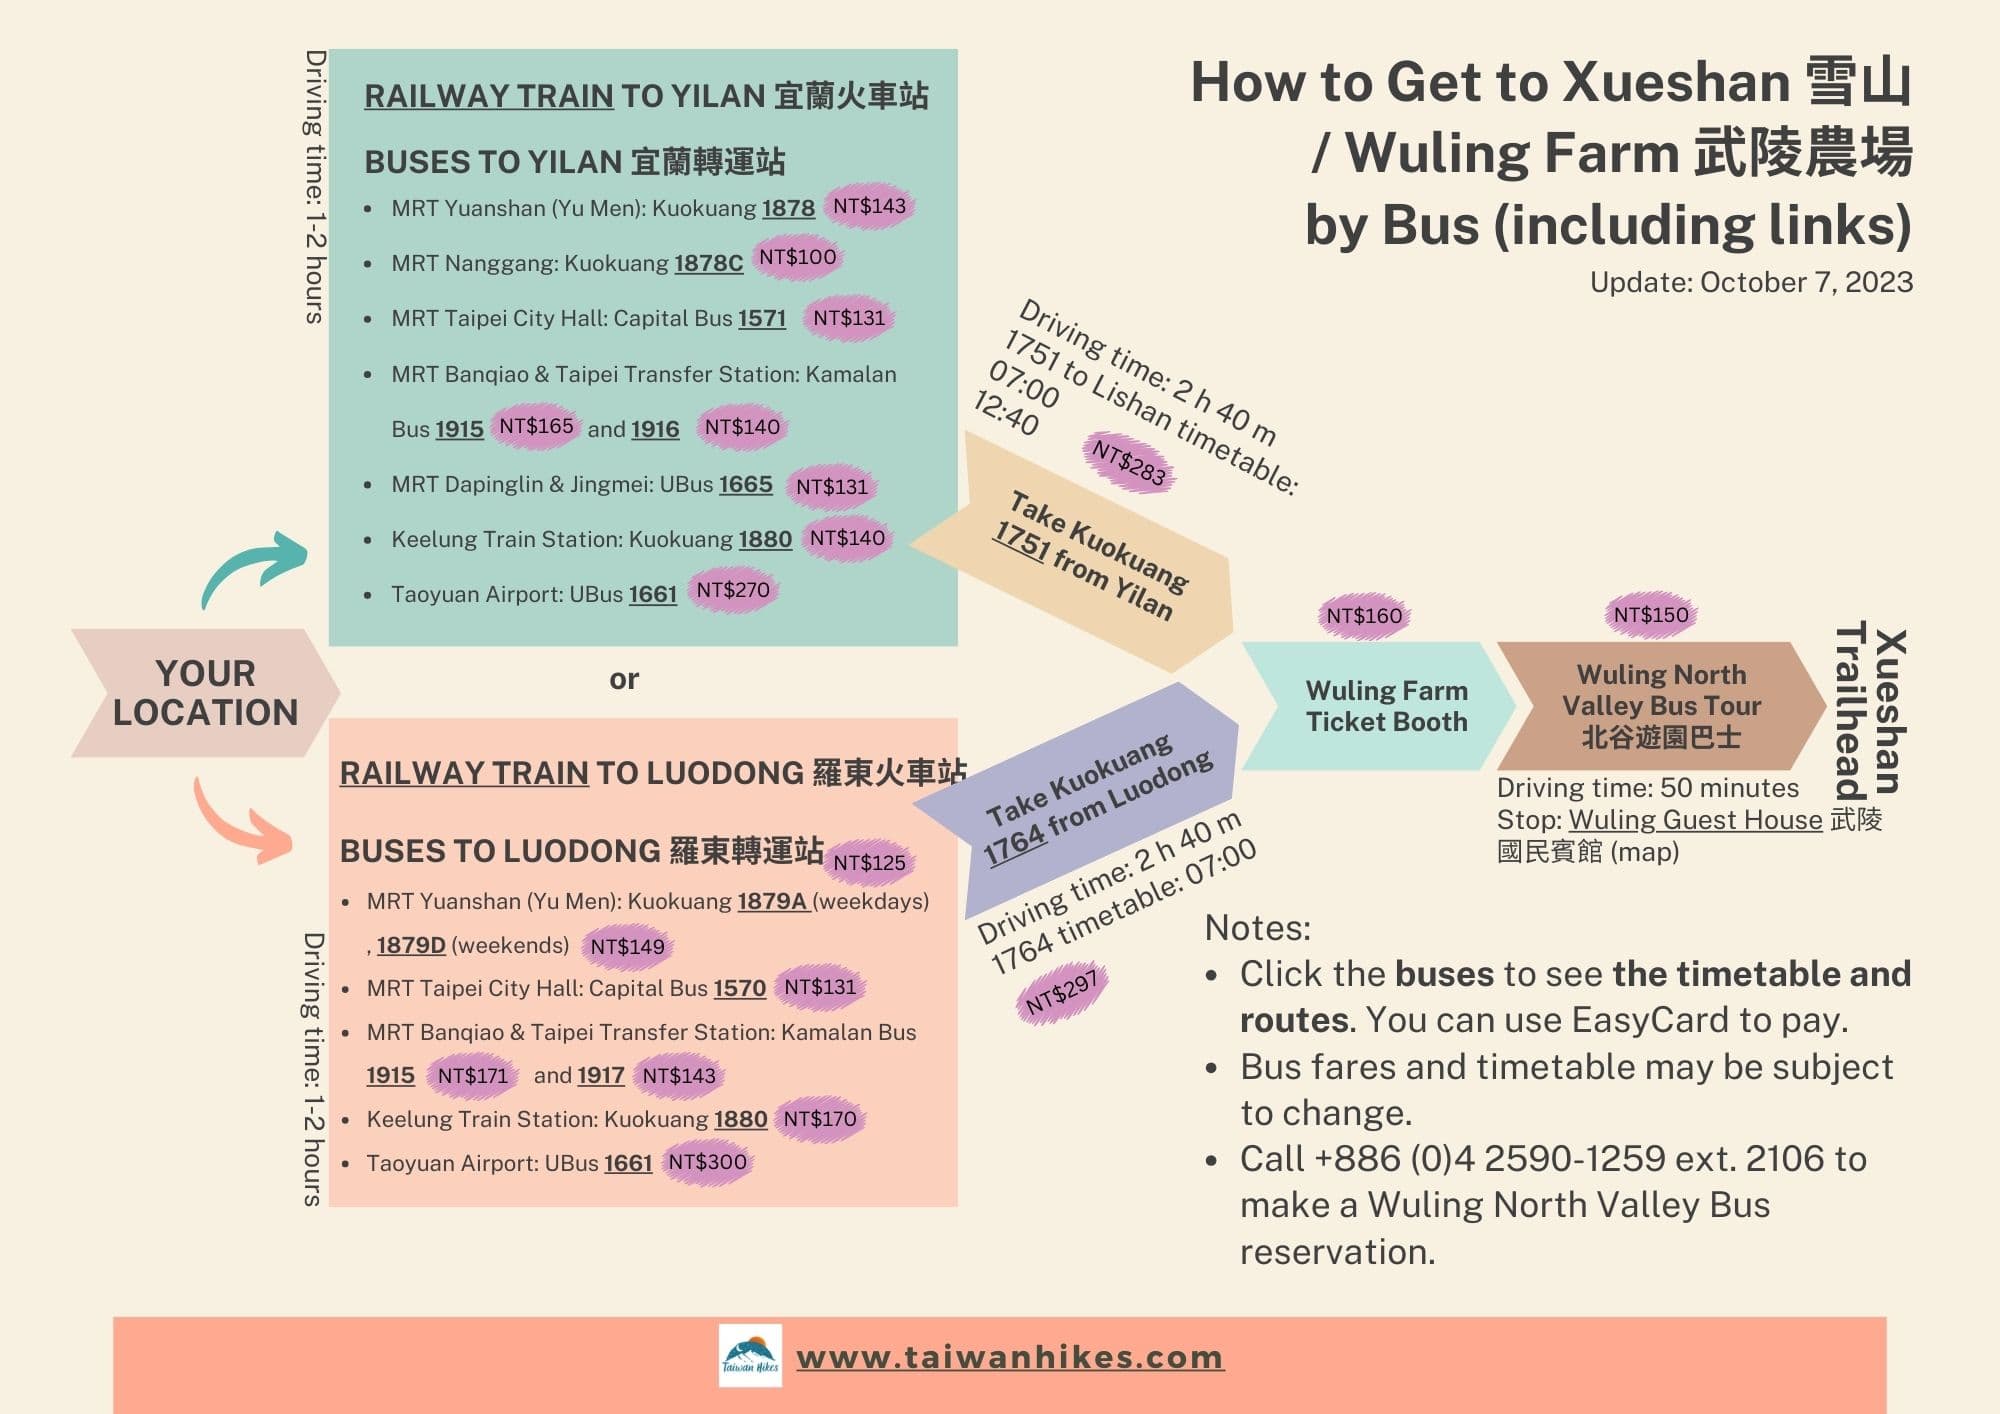 Flow chart about taking bus to Wuling Farm and Xueshan Trailhead